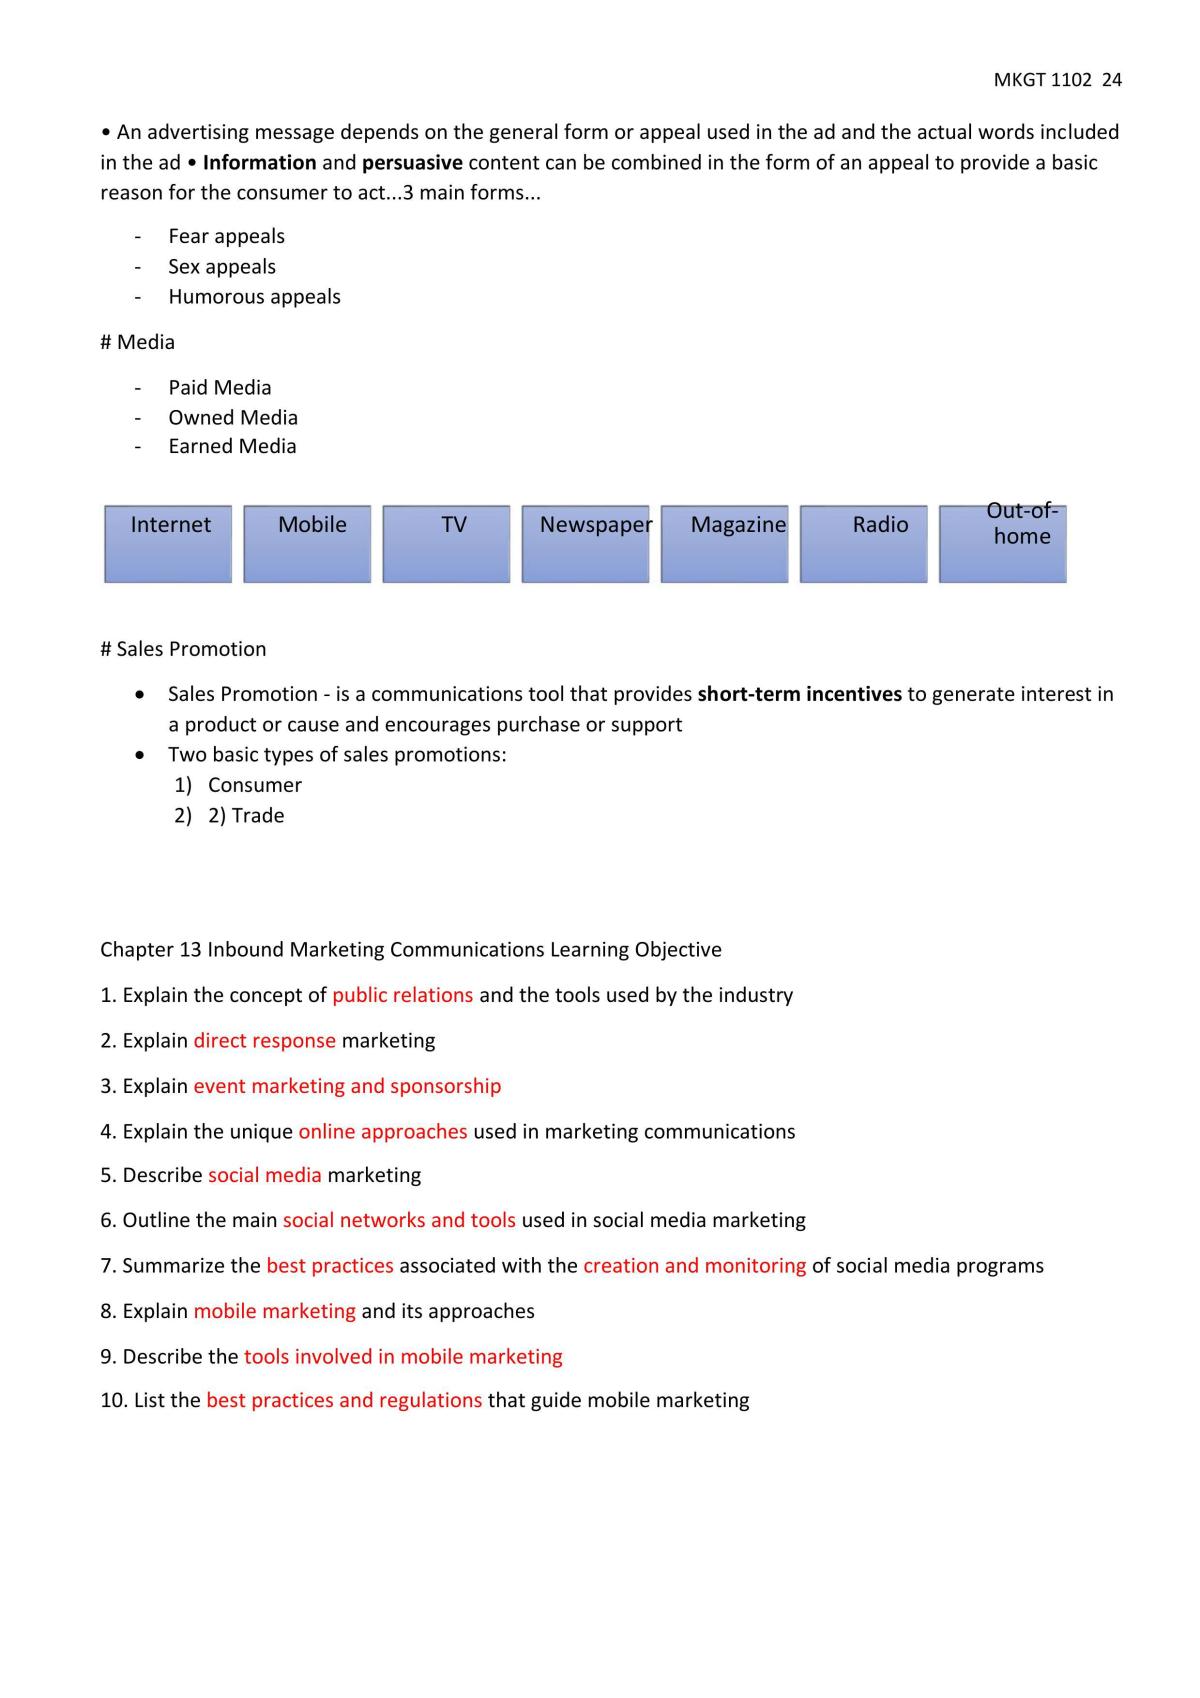 Essentials of Marketing Review - Page 24